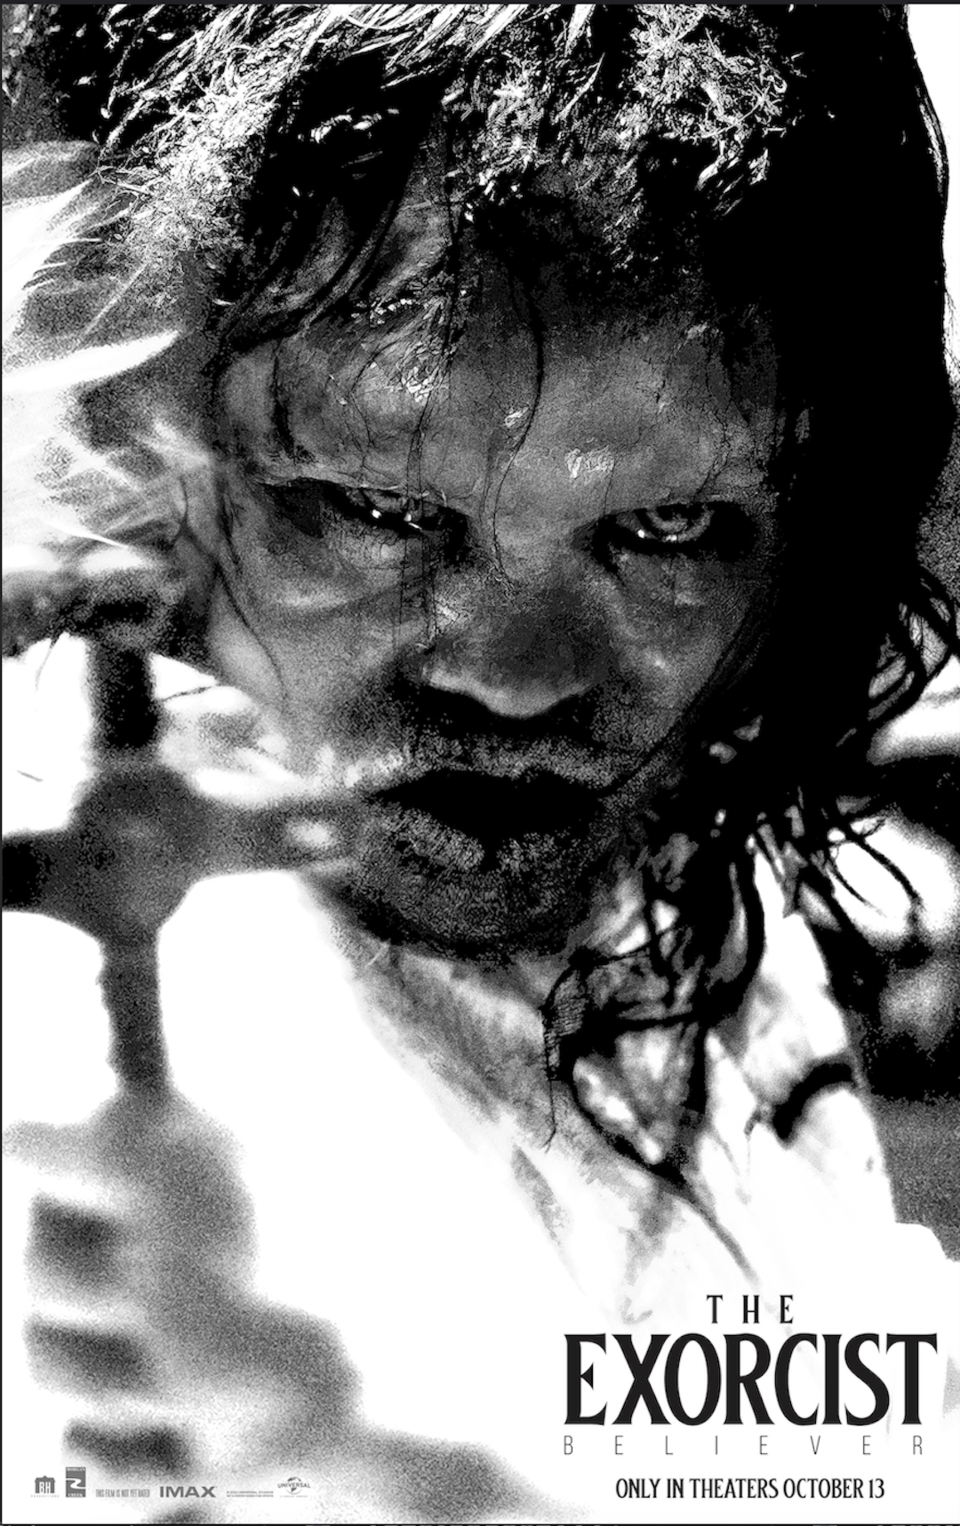 The exorcist believer poster 2